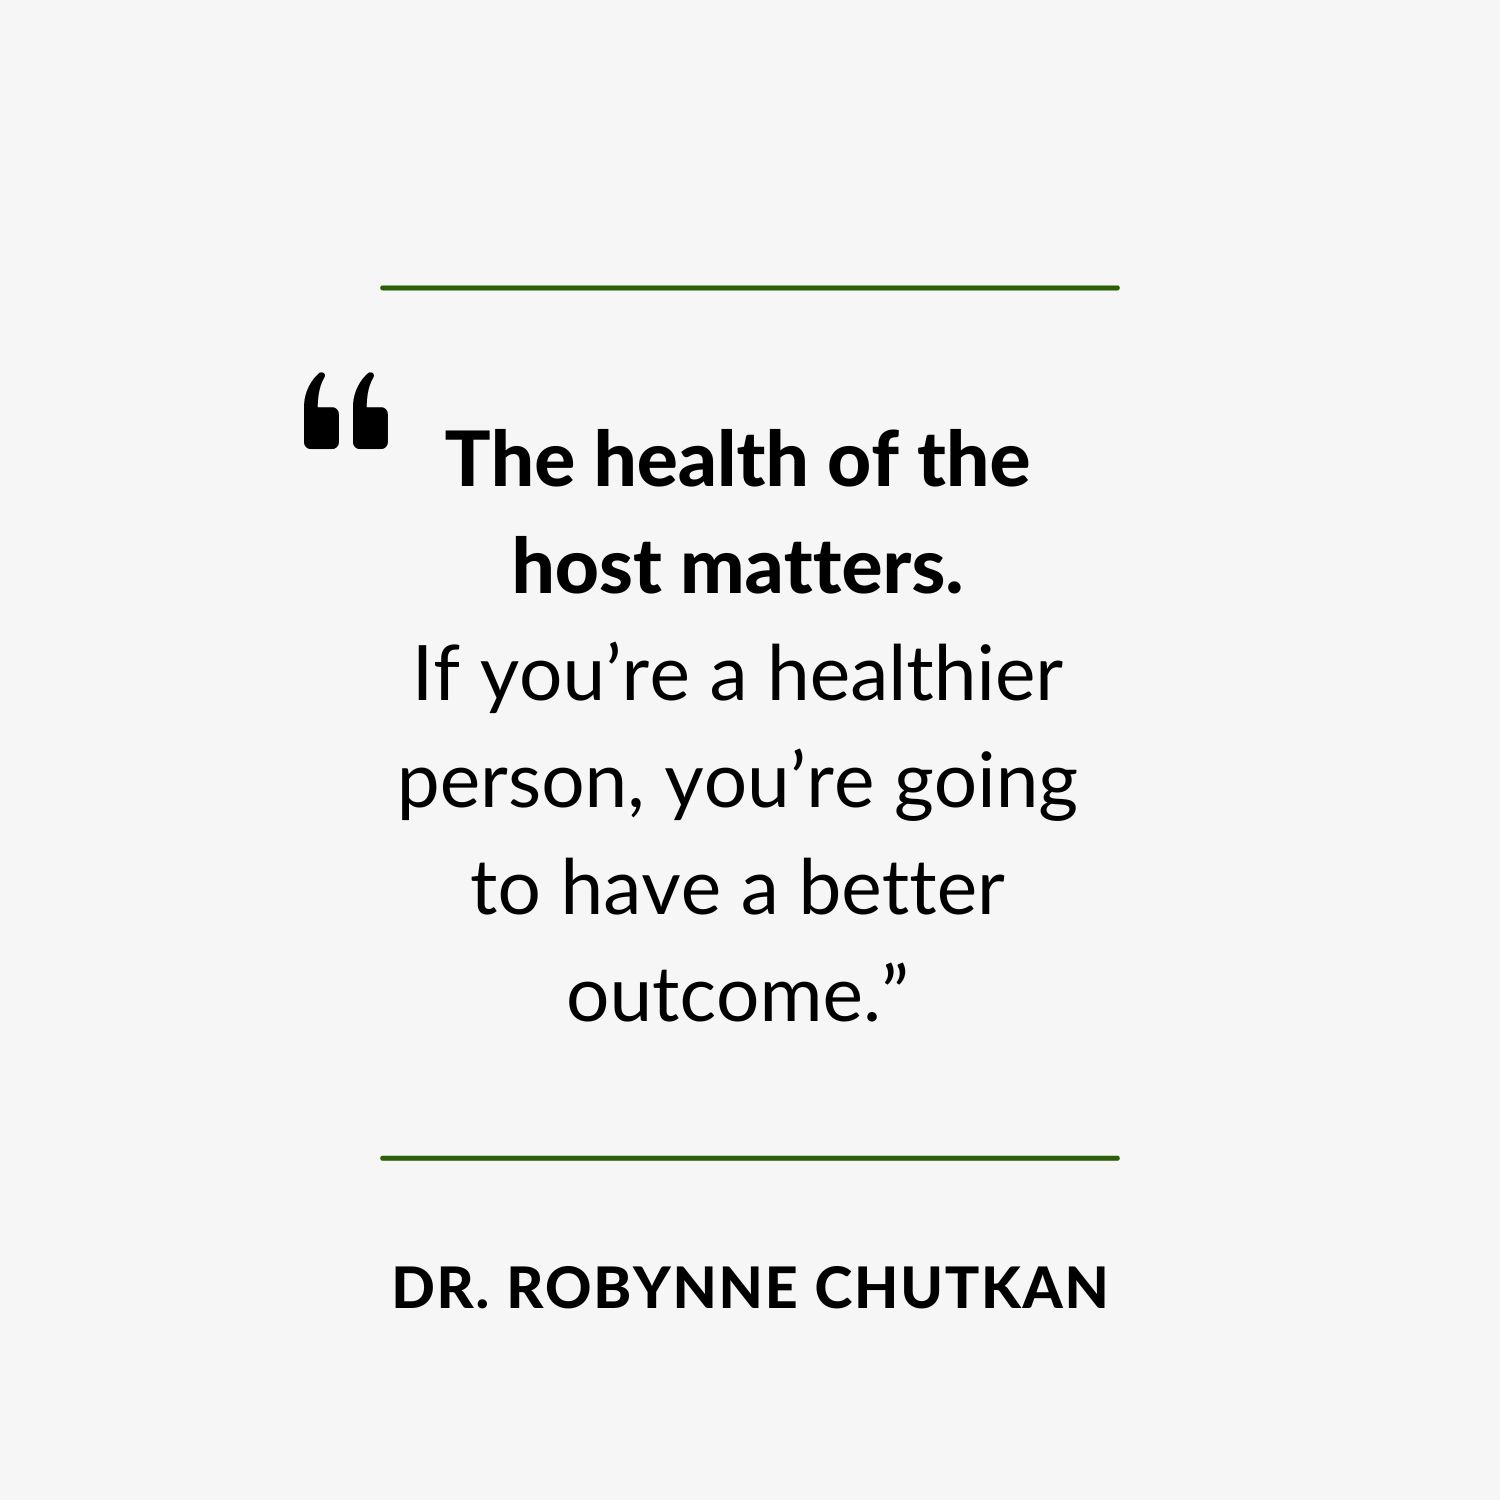 Website Quote - "The health of the host matters. If you’re a healthier person, you’re going to have a better outcome.”